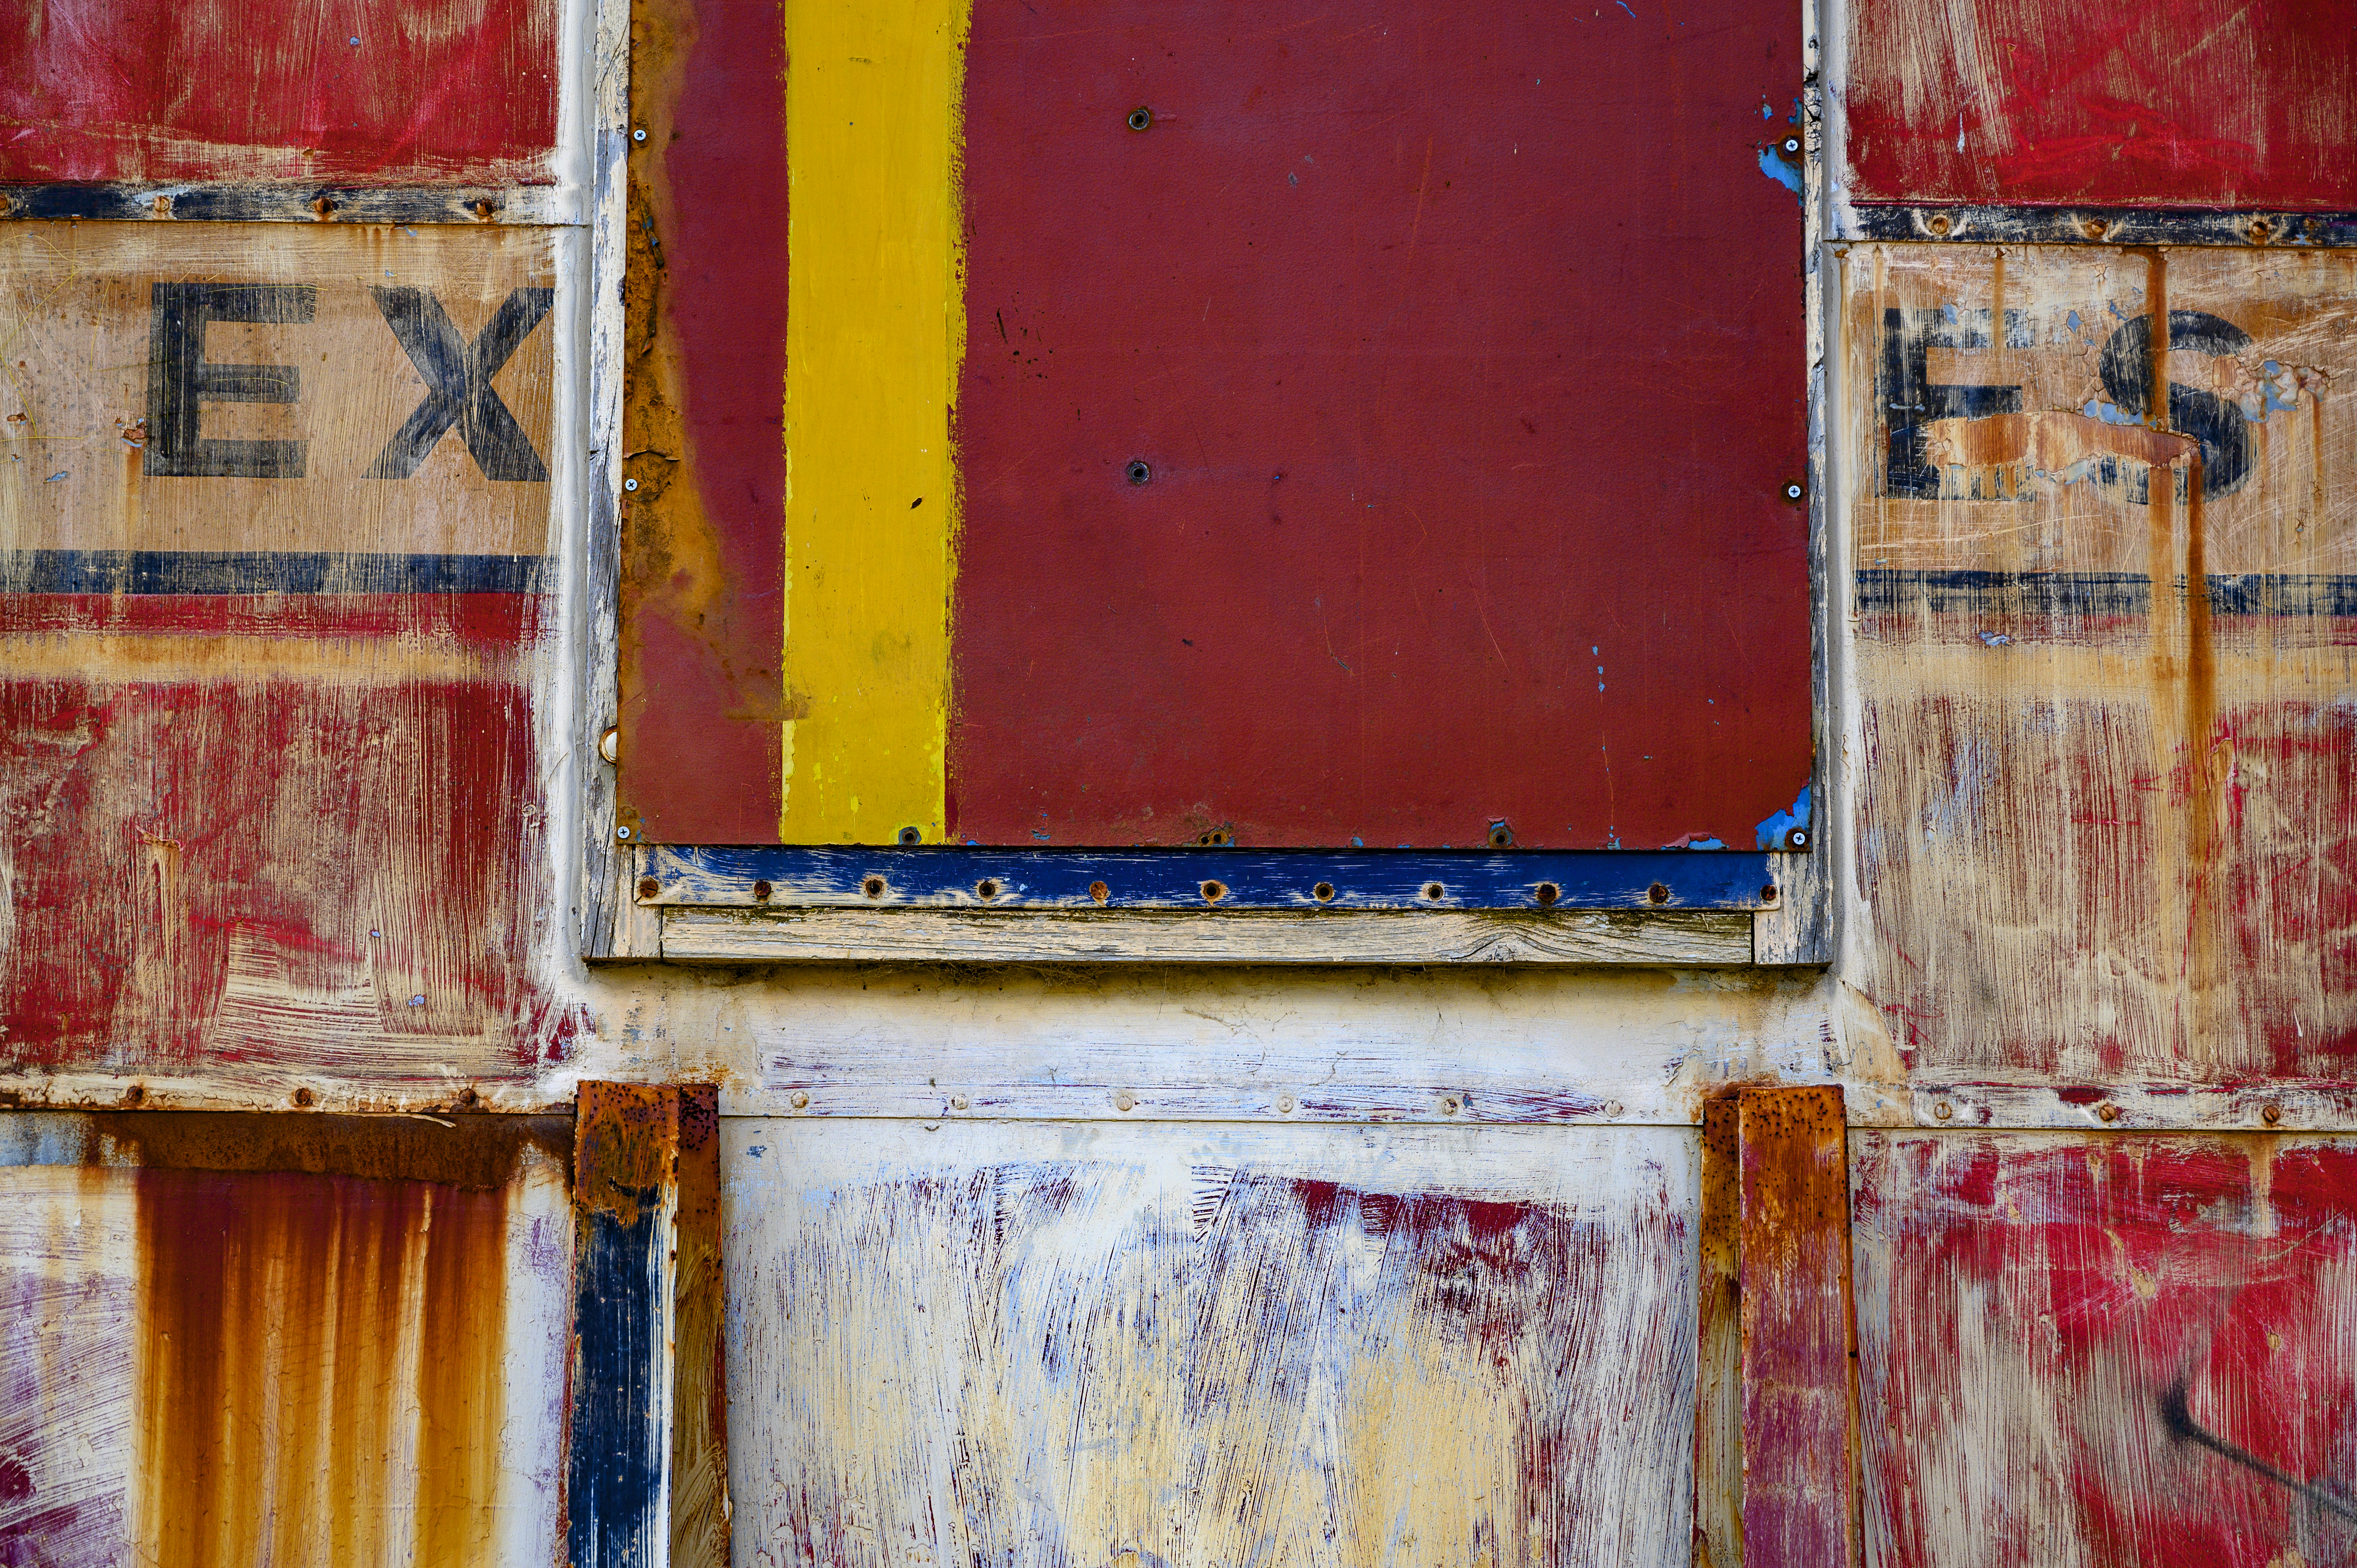 Photograph of old weathered panels that form a section of a vintage freight train carriage.